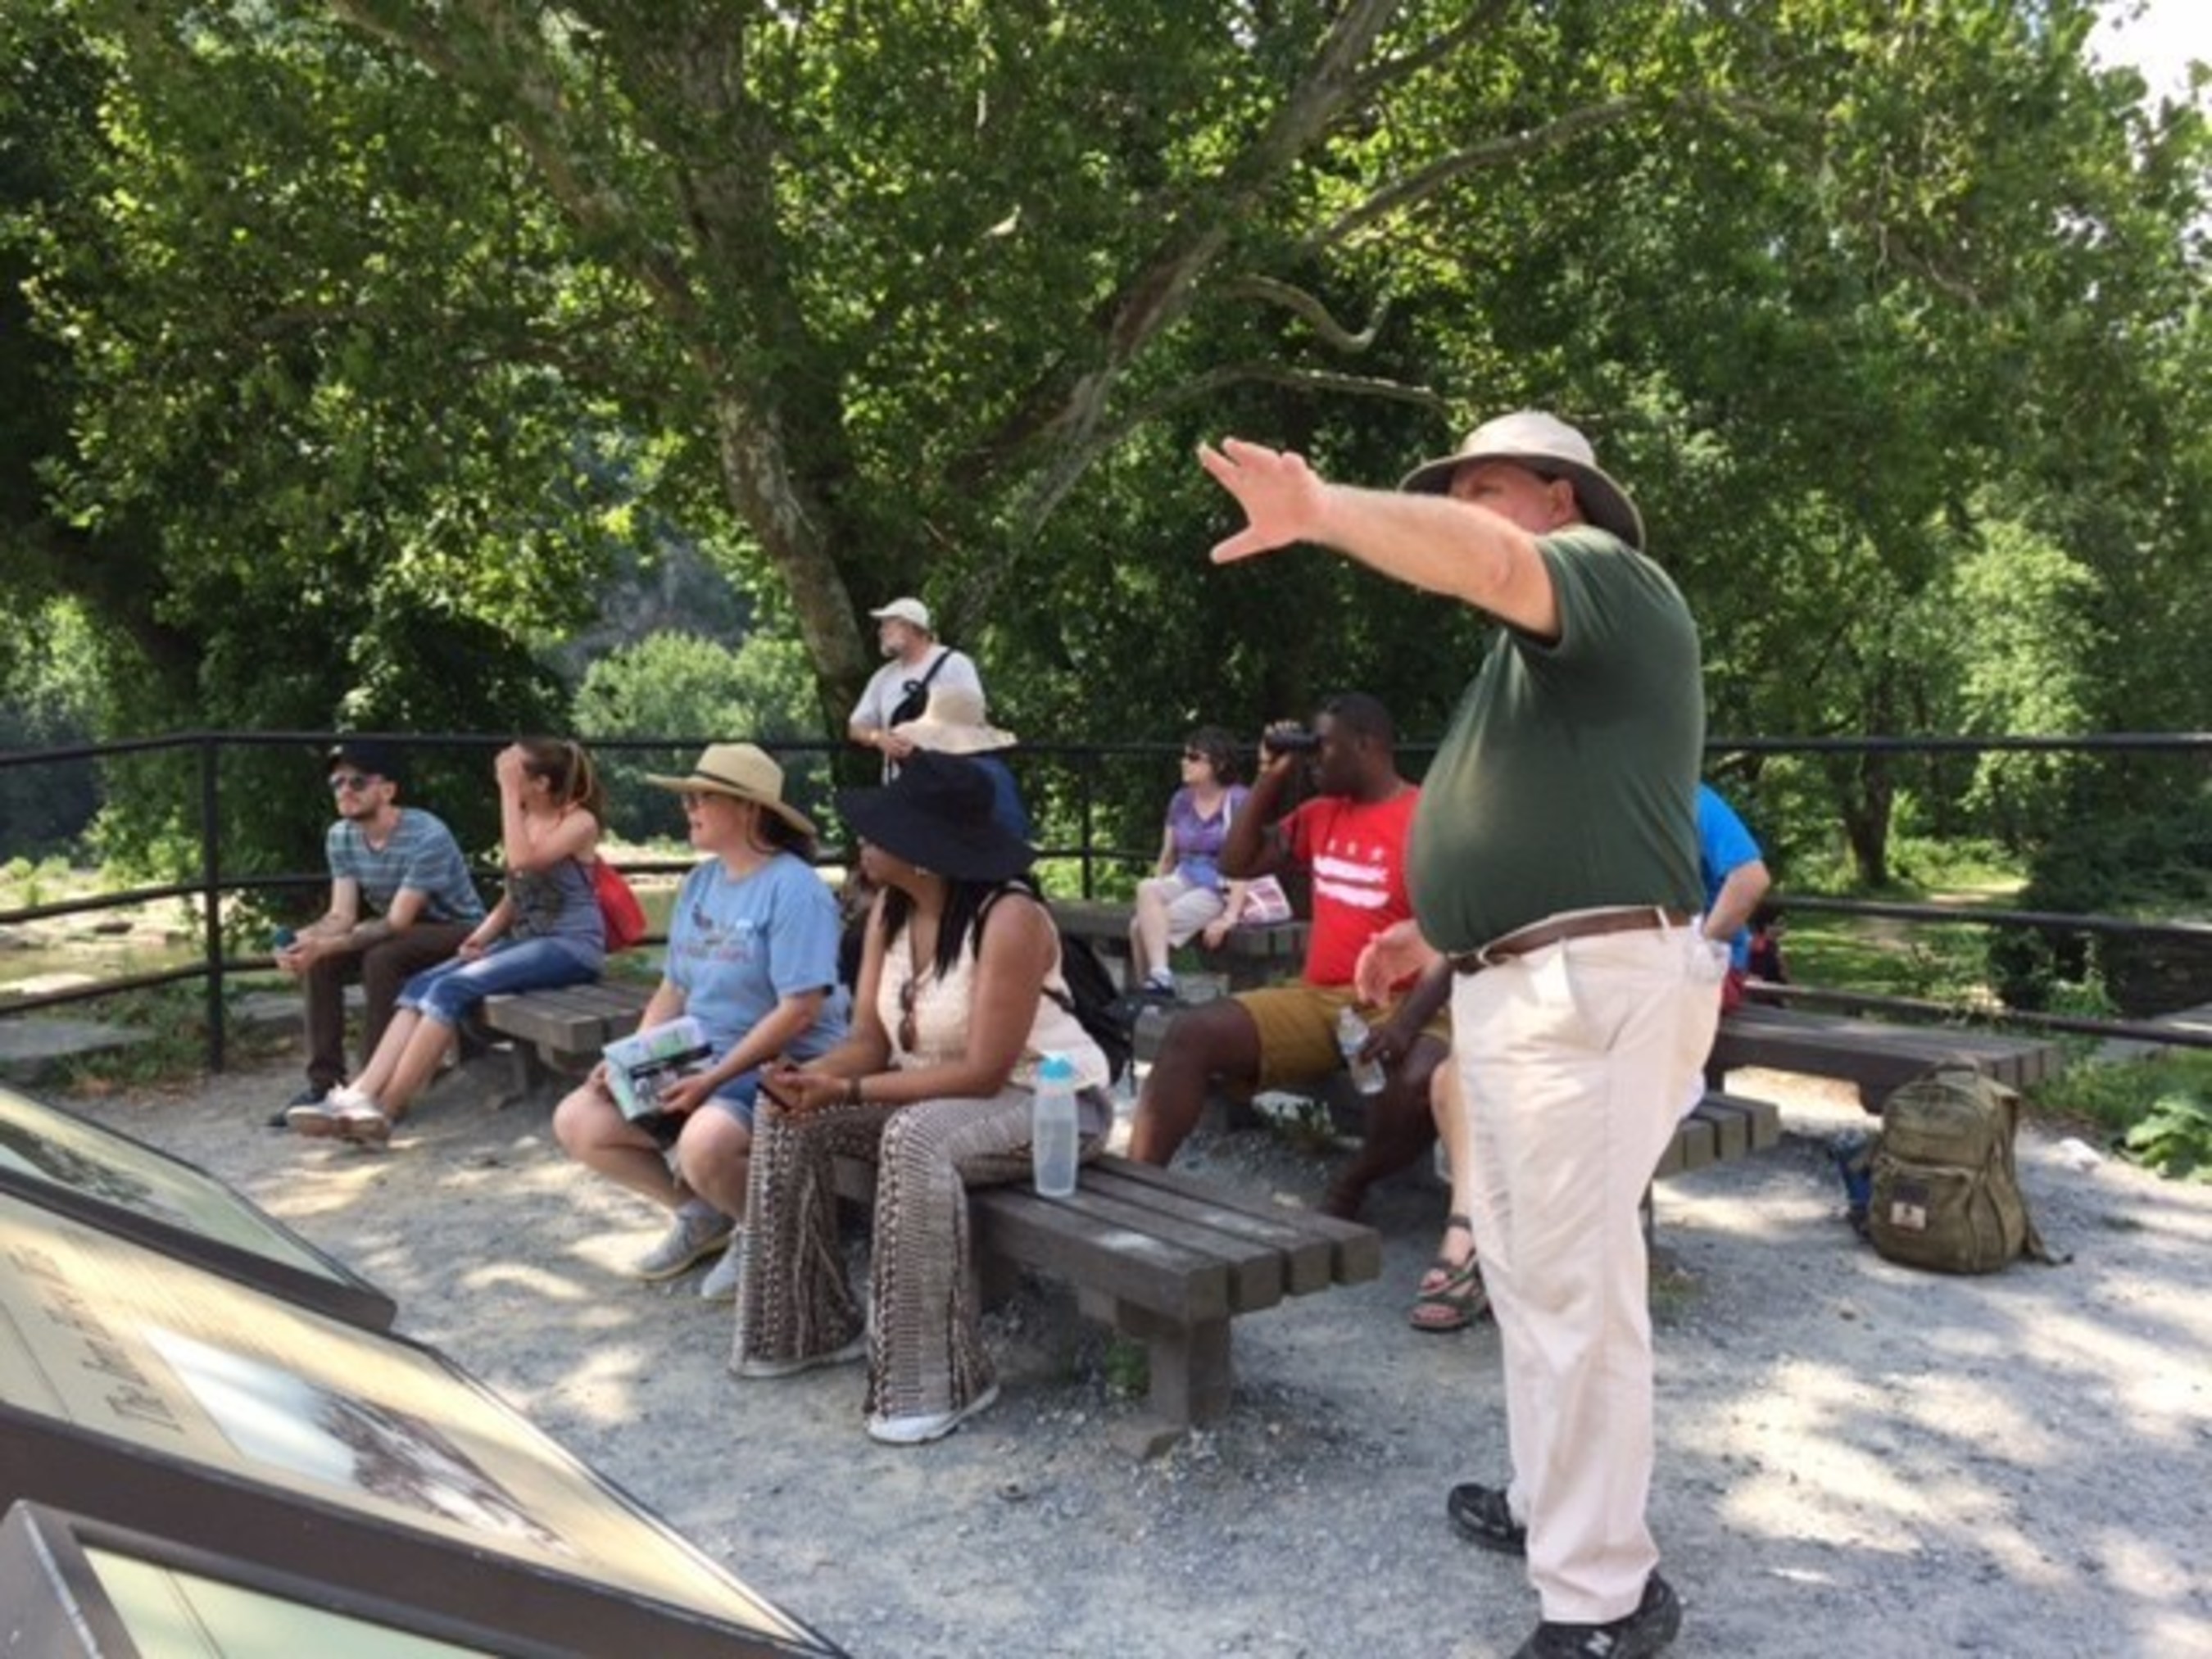 Injured veterans and guests recently took part in a guided walking tour of Harpers Ferry and learned about the town's role in American history.